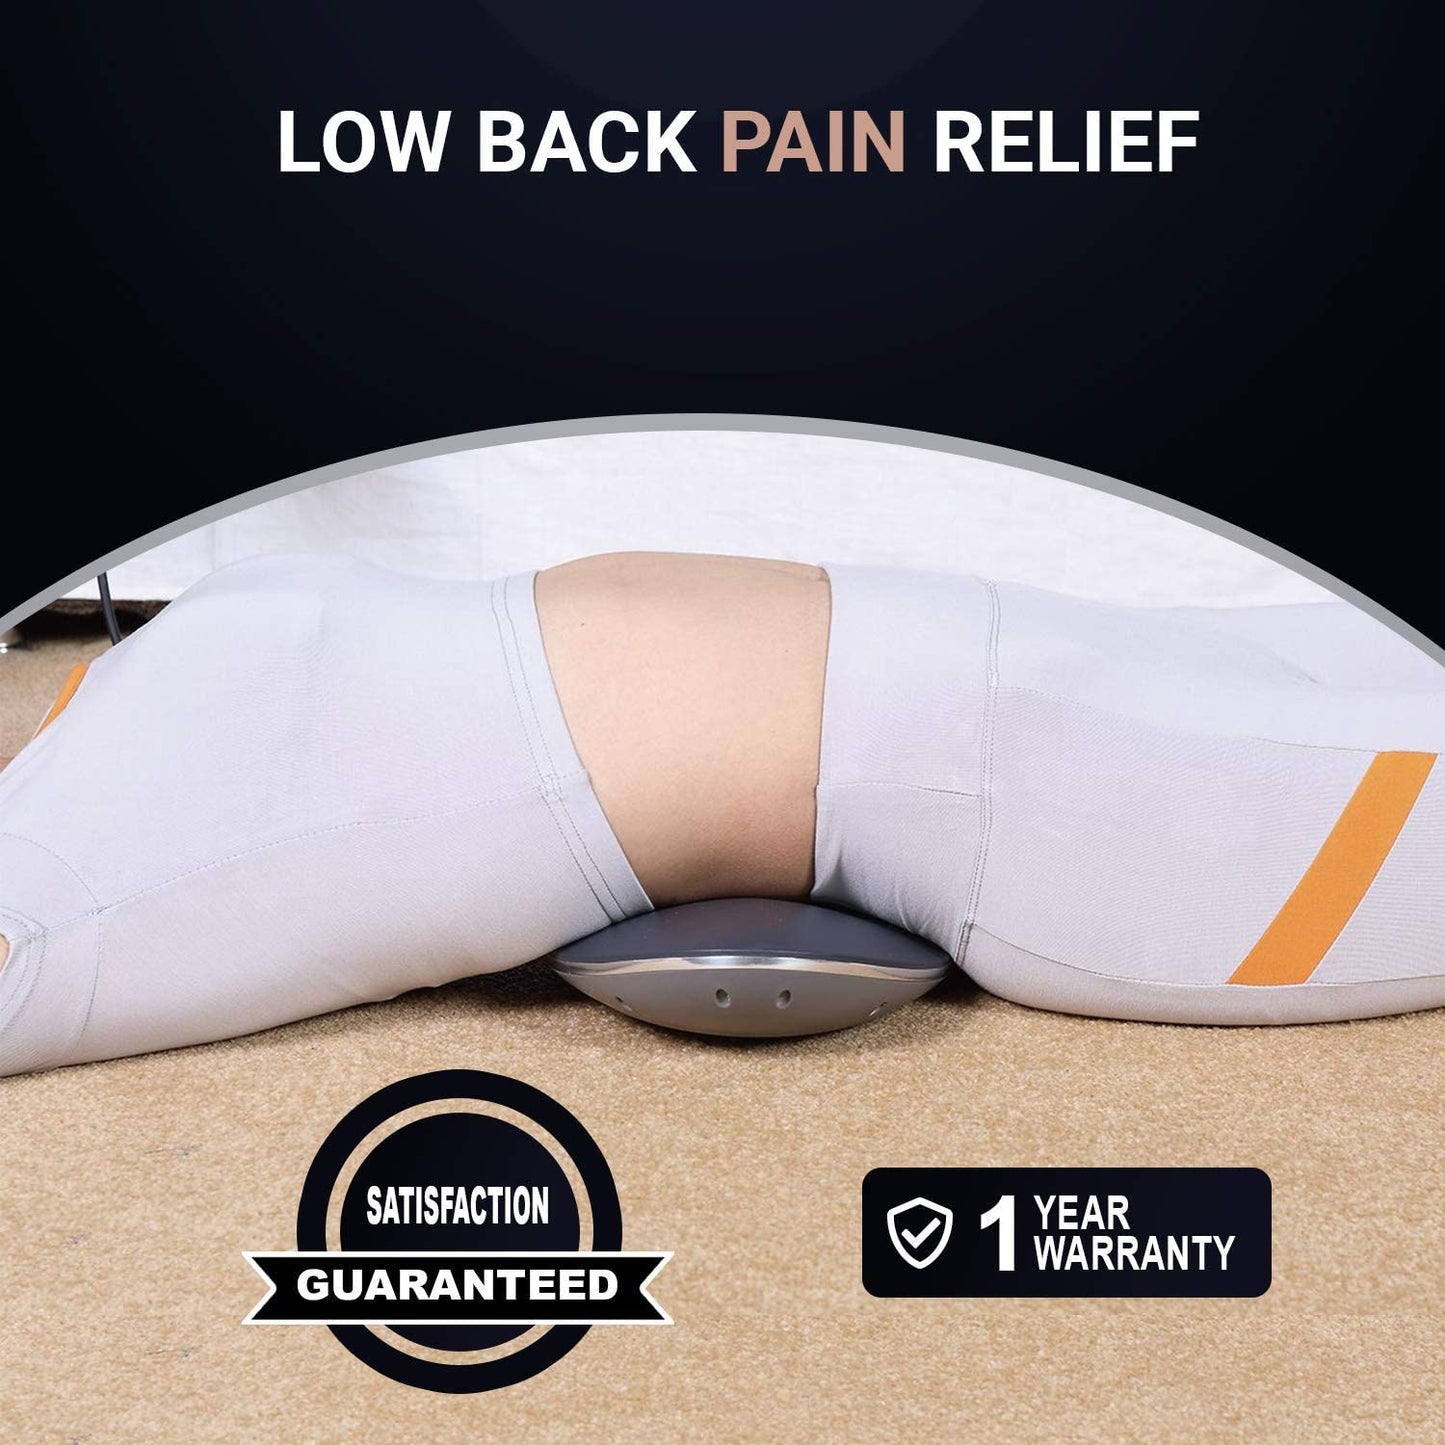 Back Pain Relief - Dynamic wedge cervical traction device